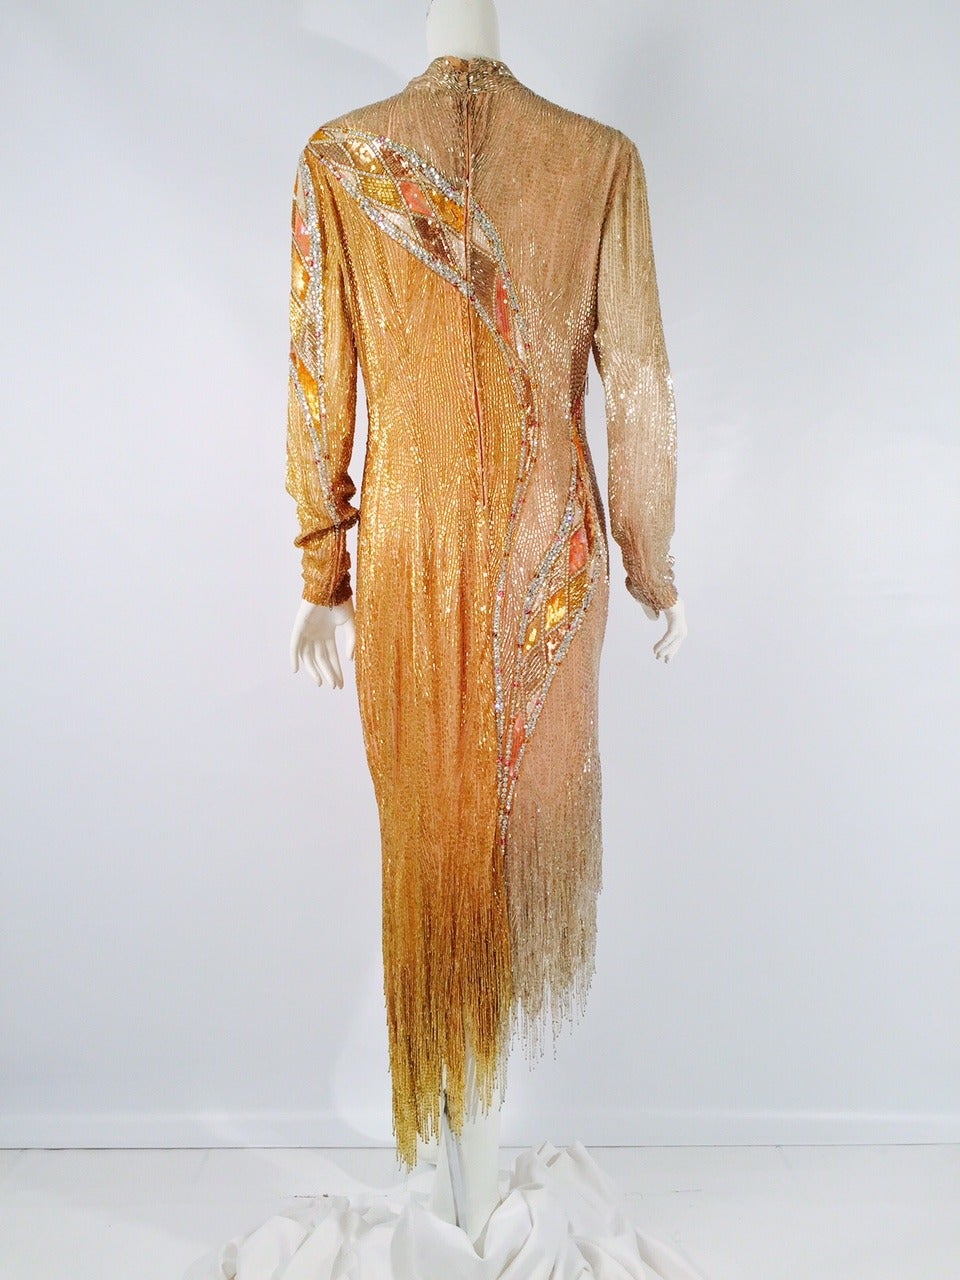 Vintage Long Sleeve Beaded Evening Dress illustrates why Bob Mackie is considered the 